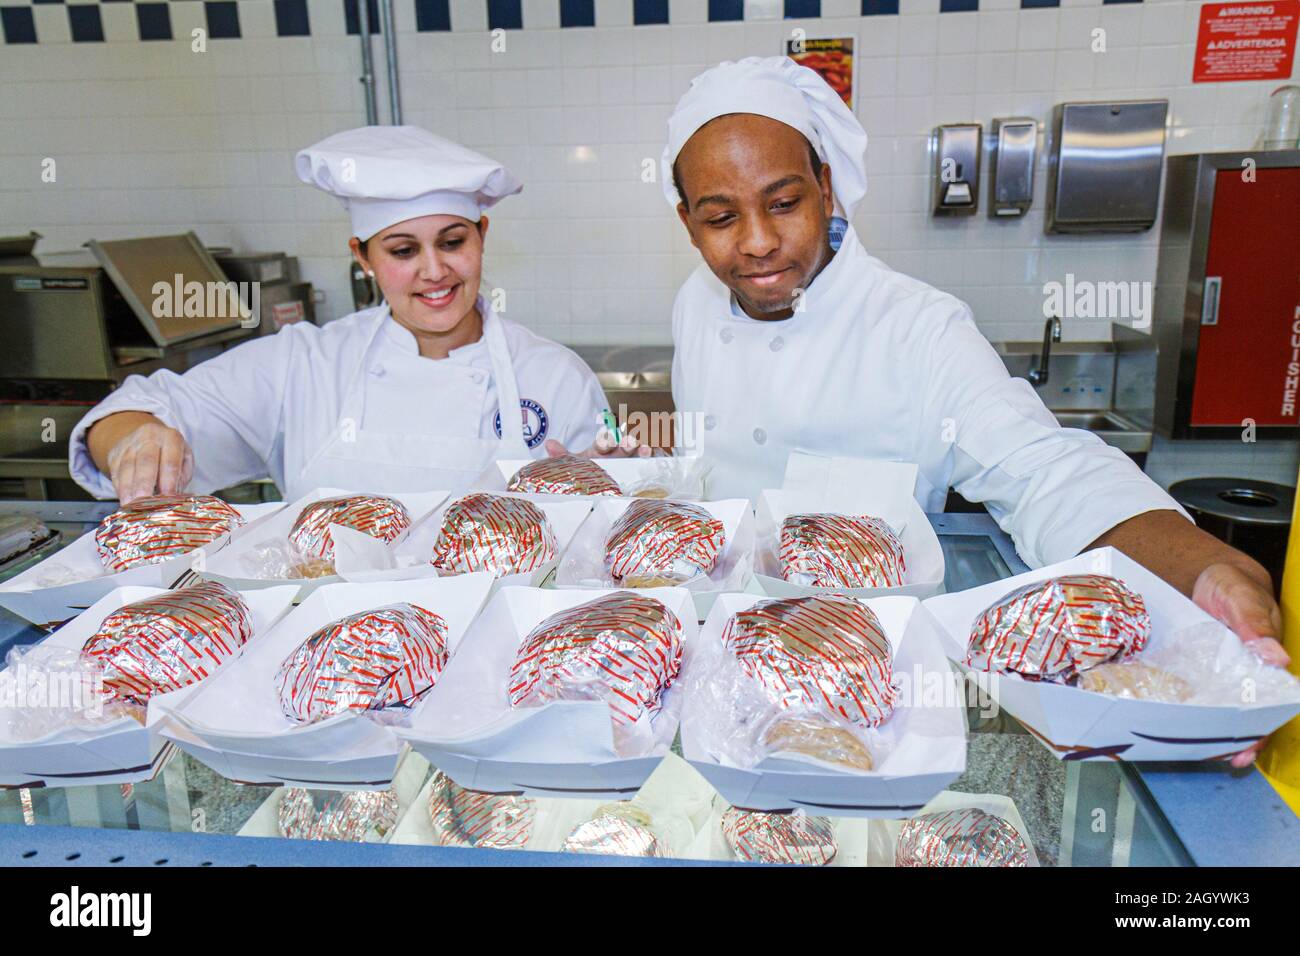 Hollywood Florida,Sheridan Technical Center,cook,chef,student students Black male,female,cafeteria,food,FL100515216 Stock Photo